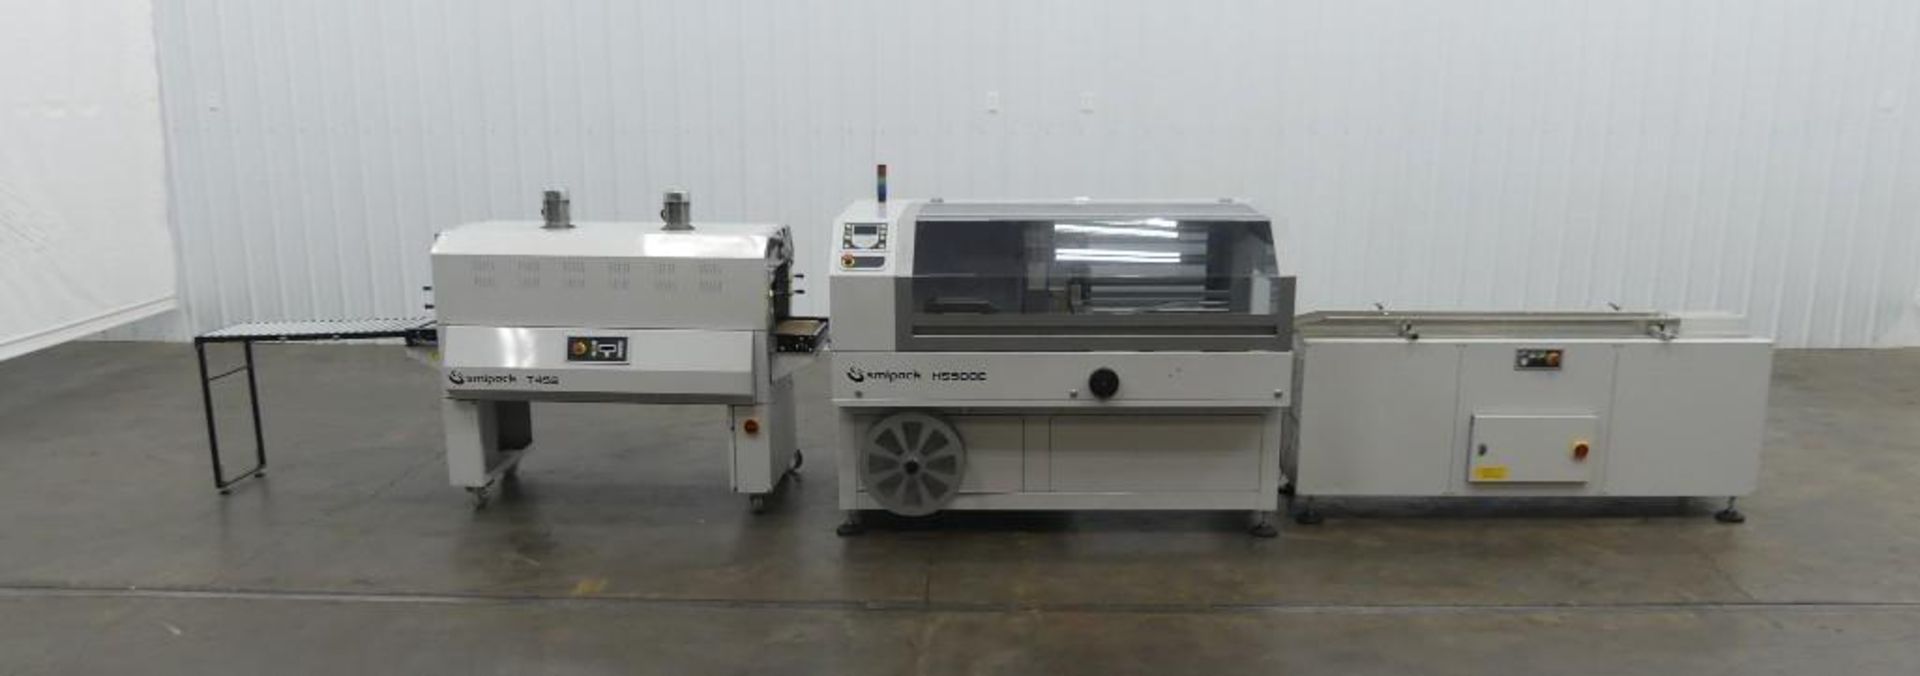 Smipack HS500E Semi-Automatic Side Sealer - Image 50 of 77